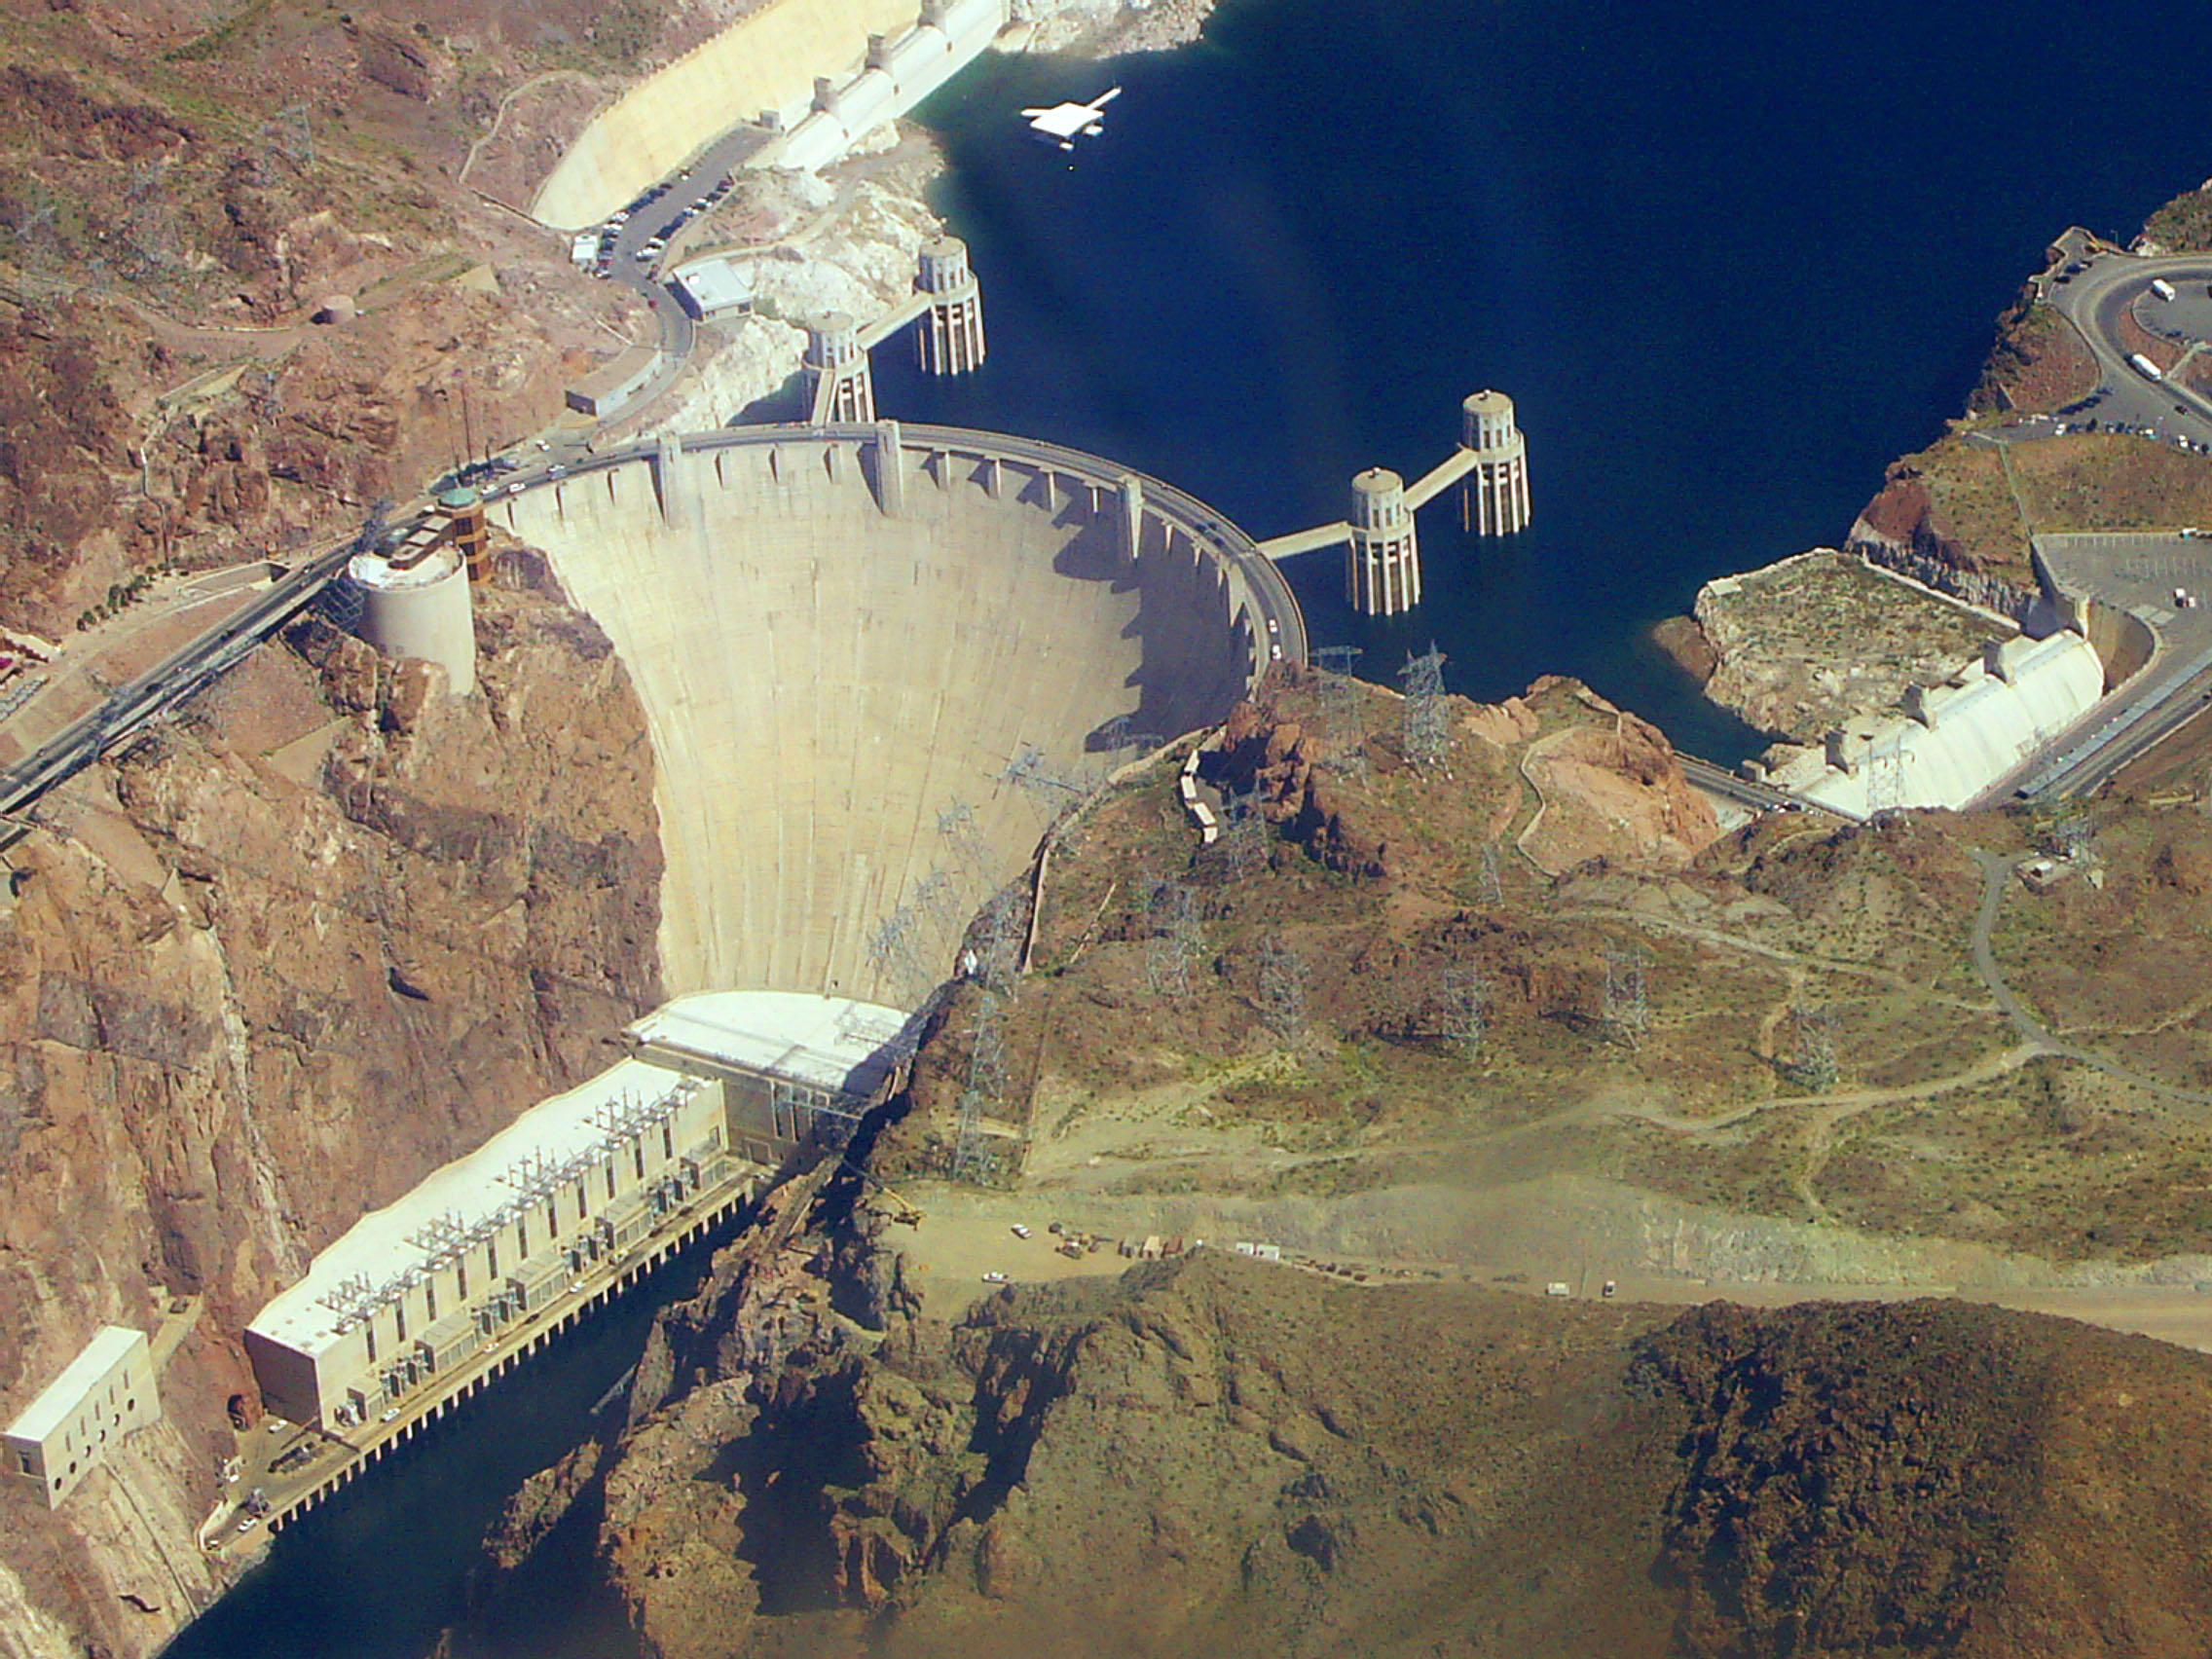 File:Hoover dam from air.jpg - Wikimedia Commons